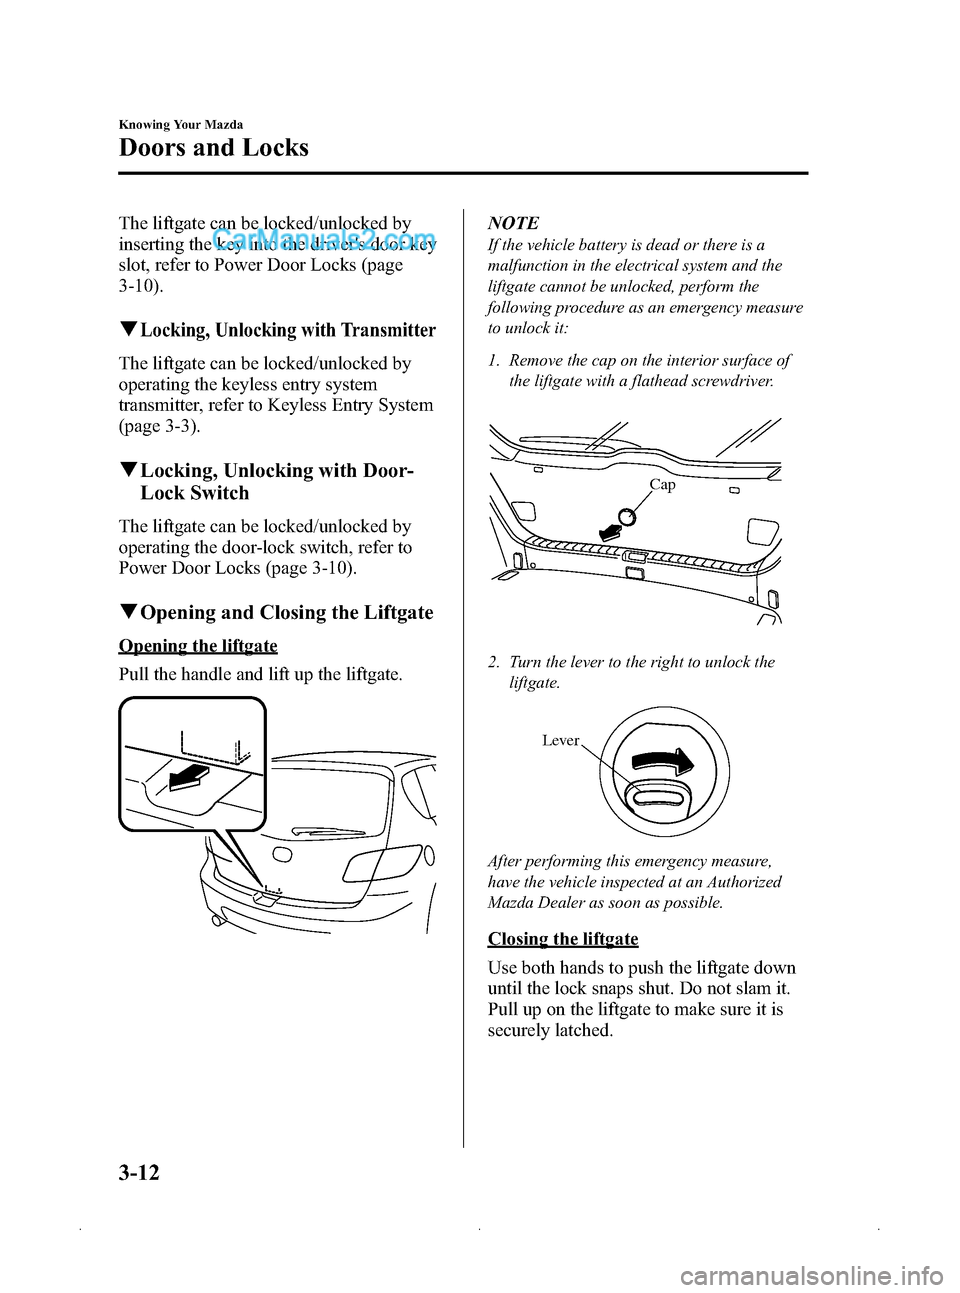 MAZDA MODEL MAZDASPEED 3 2009  Owners Manual (in English) Black plate (86,1)
The liftgate can be locked/unlocked by
inserting the key into the drivers door key
slot, refer to Power Door Locks (page
3-10).
qLocking, Unlocking with Transmitter
The liftgate ca